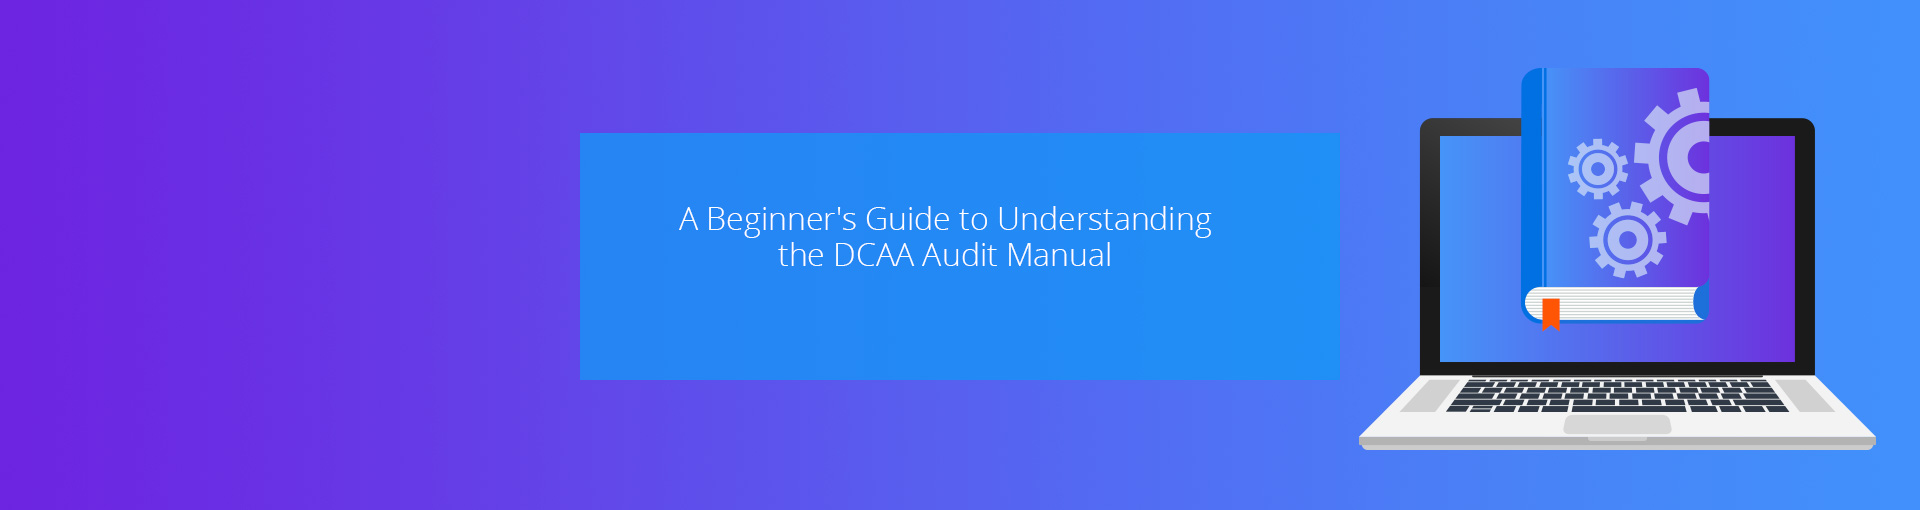 A Beginner's Guide to Understanding the DCAA Audit Manual Featured Image